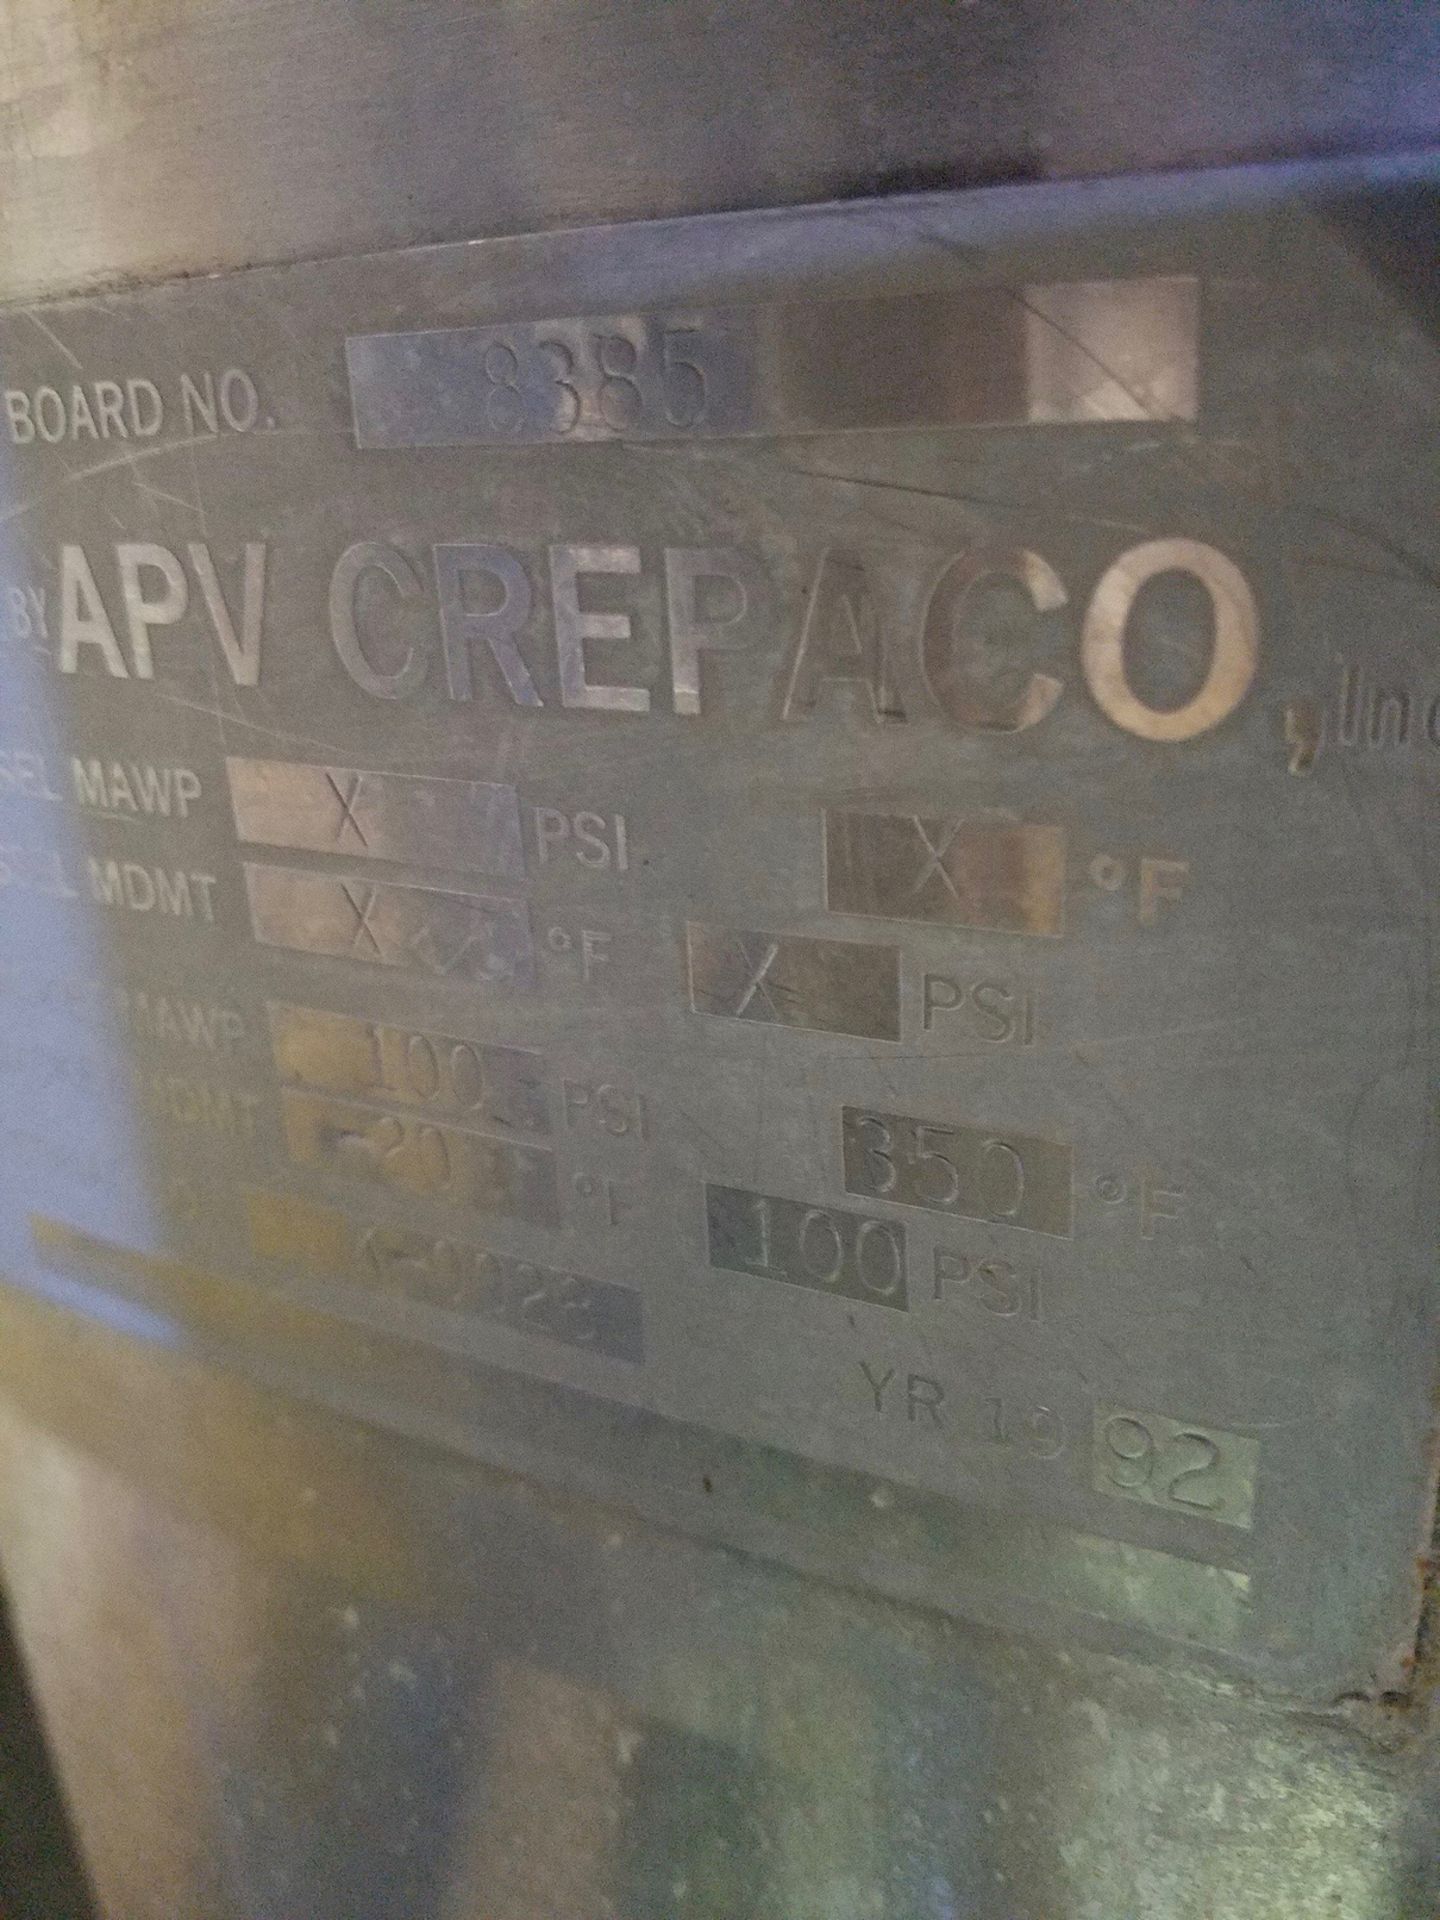 APV Crepaco Scrape Surface Double Motion Jacketed Mixing Tank, 50" x 33", Cone B | Rigging: $325 - Image 4 of 5